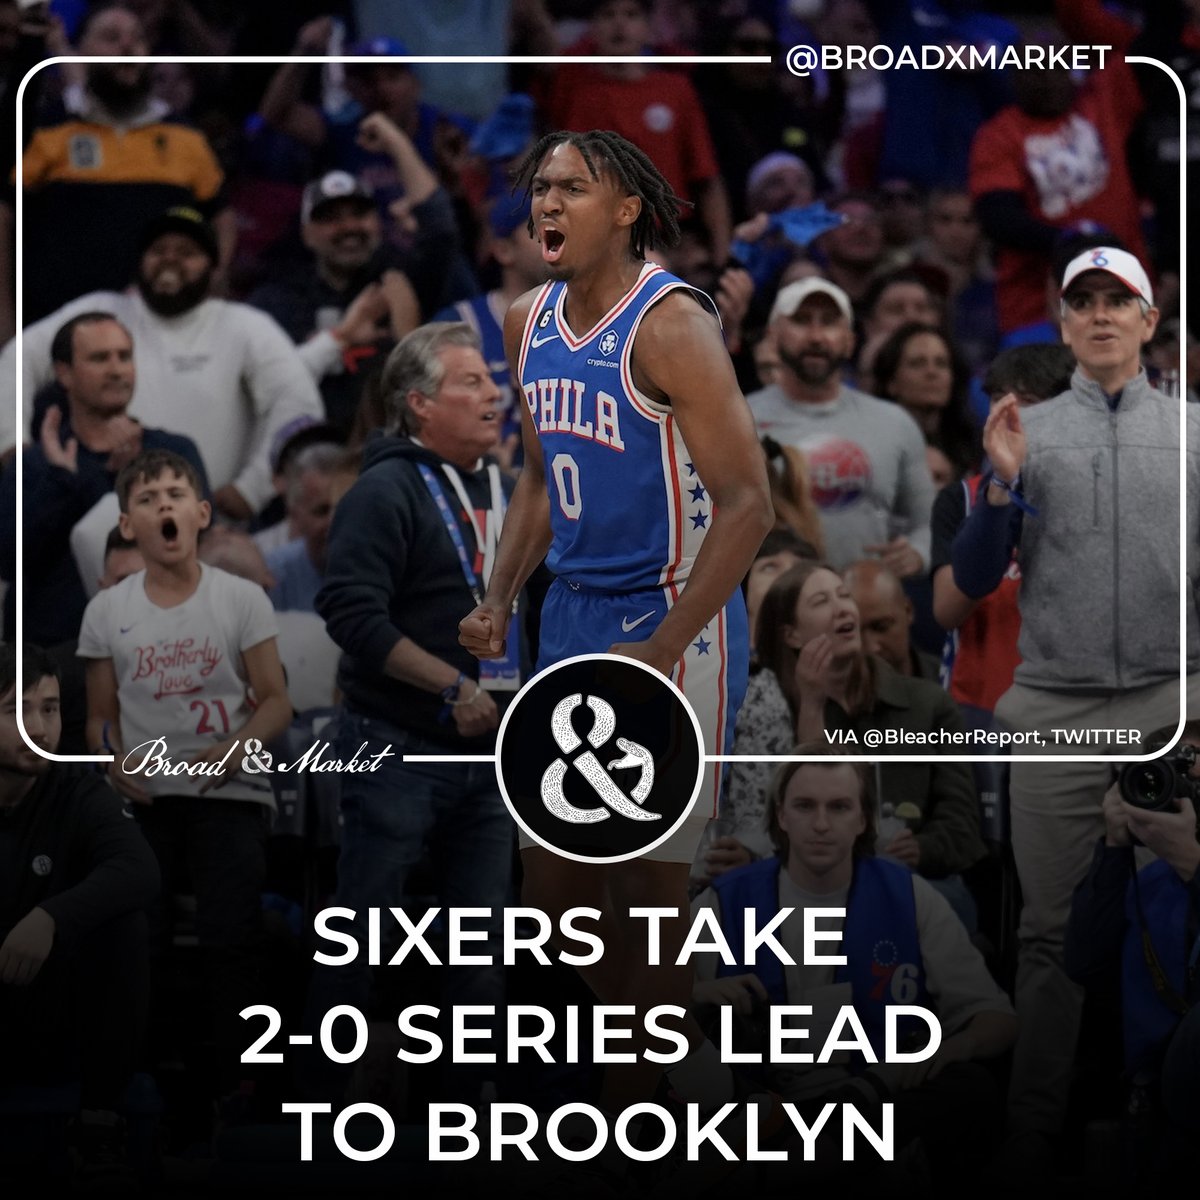 Maxey Shines as Sixers Take Game 2 of the Series

CLICK LINK BELOW FOR FULL ARTICLE
.
tinyurl.com/maxeysixh
.
.
#embiid #maxey #tyrsemaxey #nba #nbaplayoffs #sixersnation #76ersnation #ers #76er #sixersplayoffs #phillysports #jamesharden